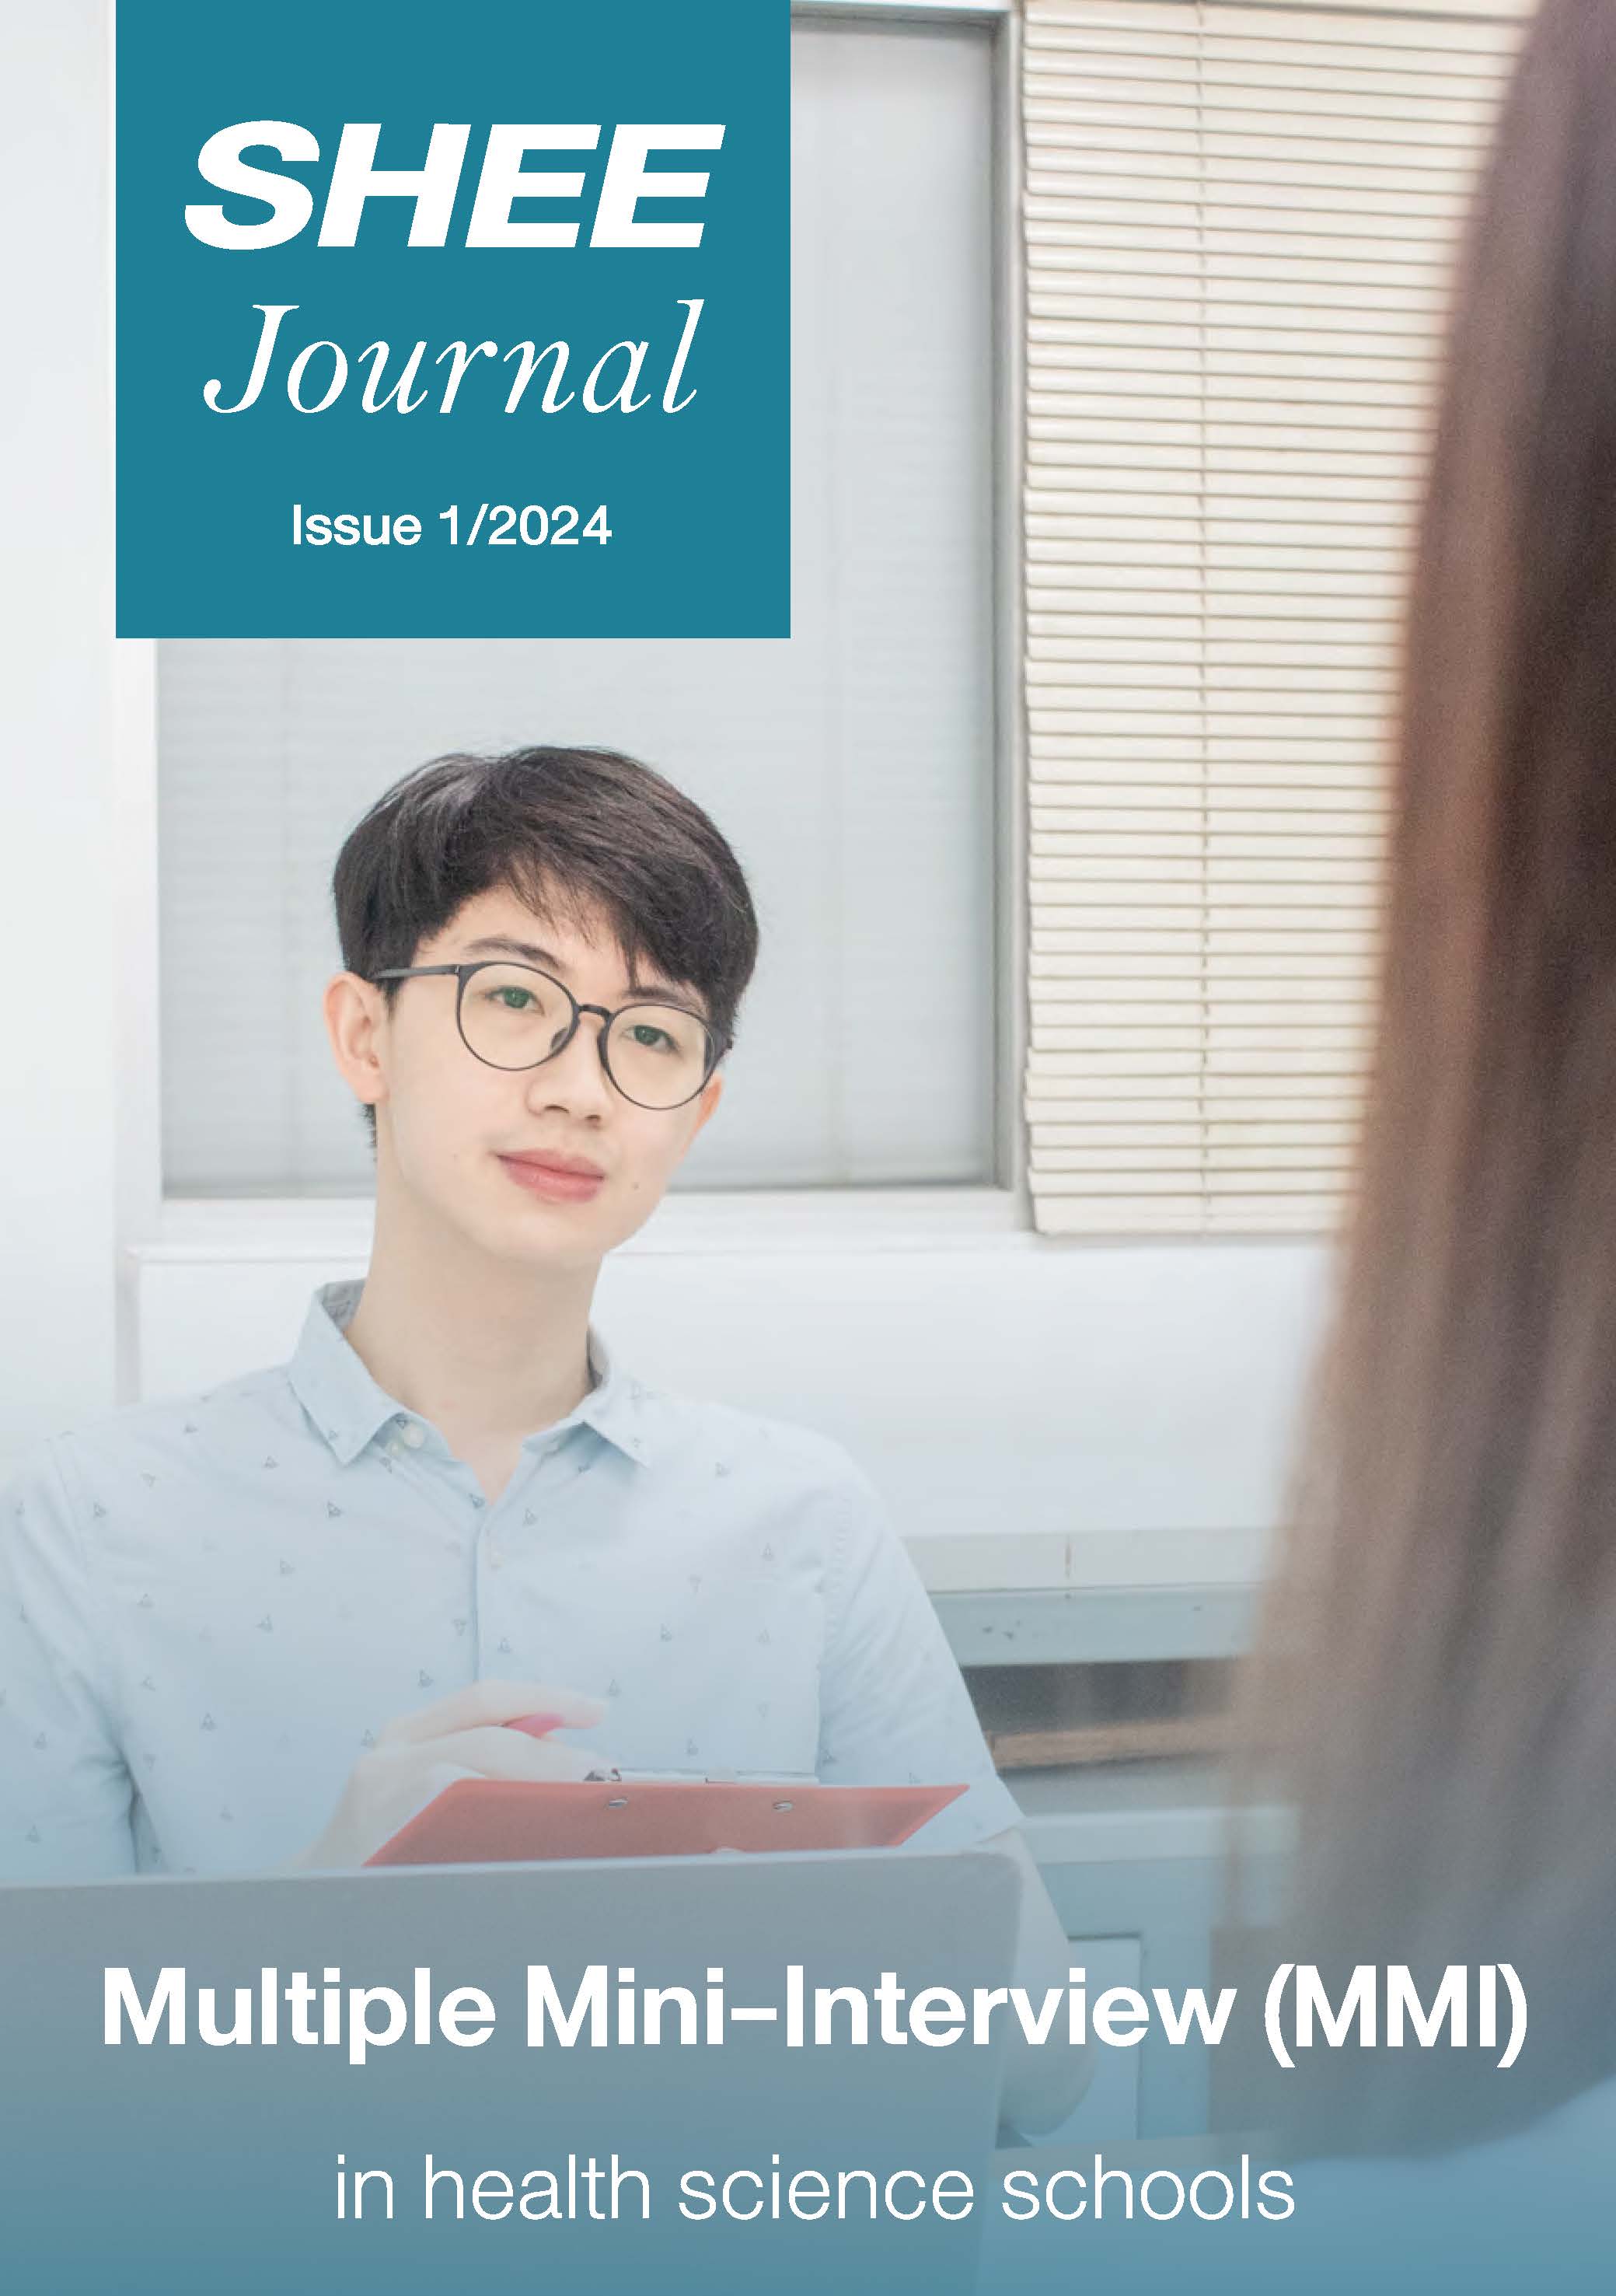 Journal Issue 1, 2024 Multiple min-interview (MMI)